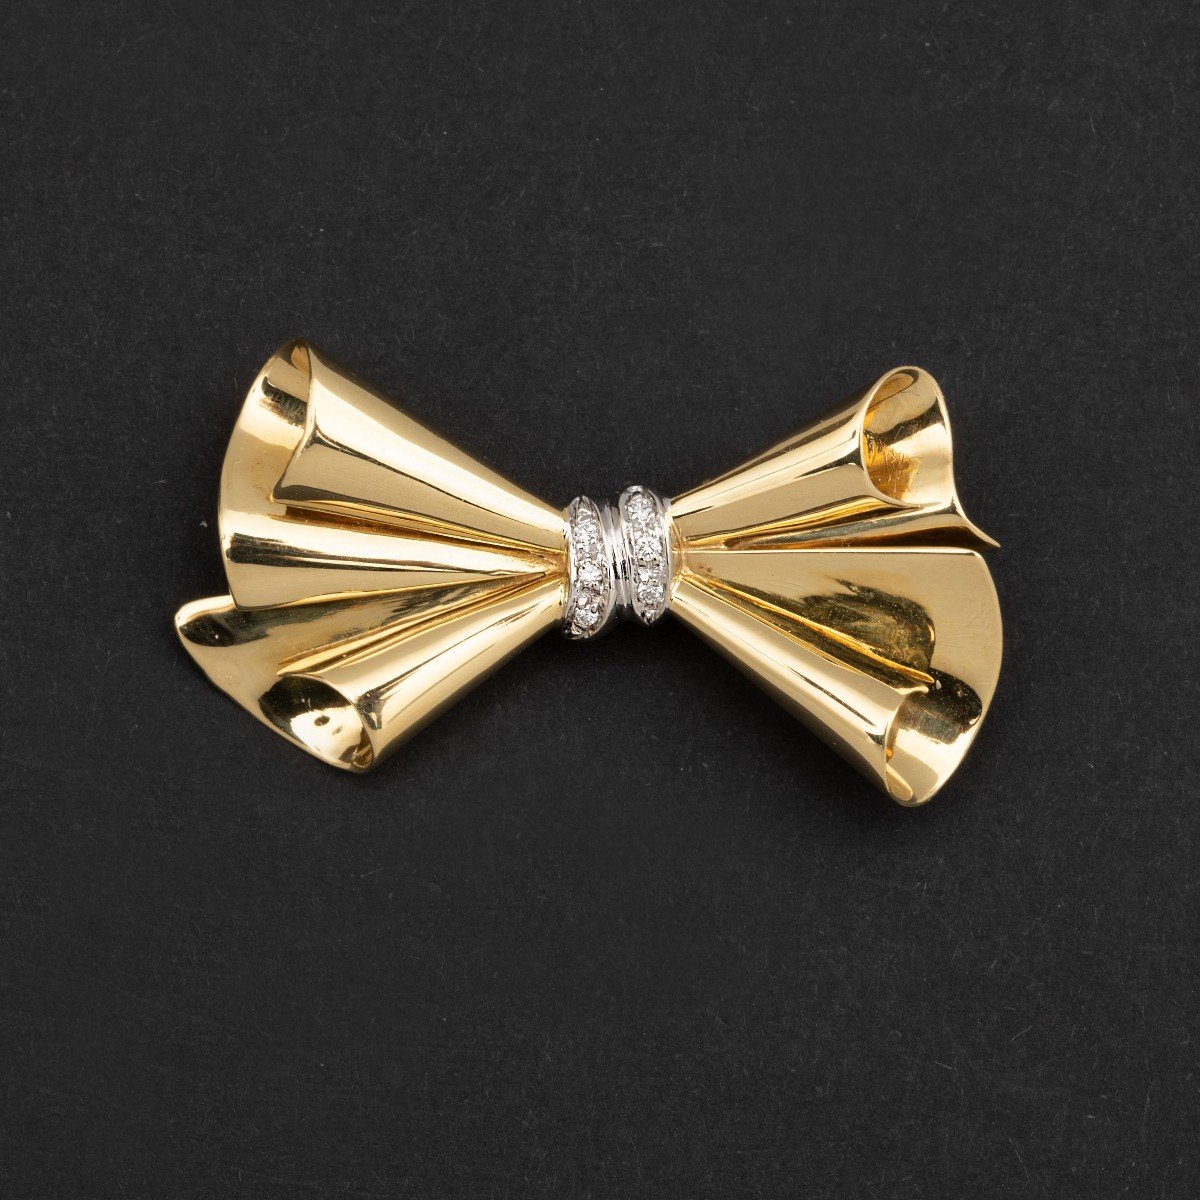 3254 – Yellow Gold And Gray Diamond Knot Brooch